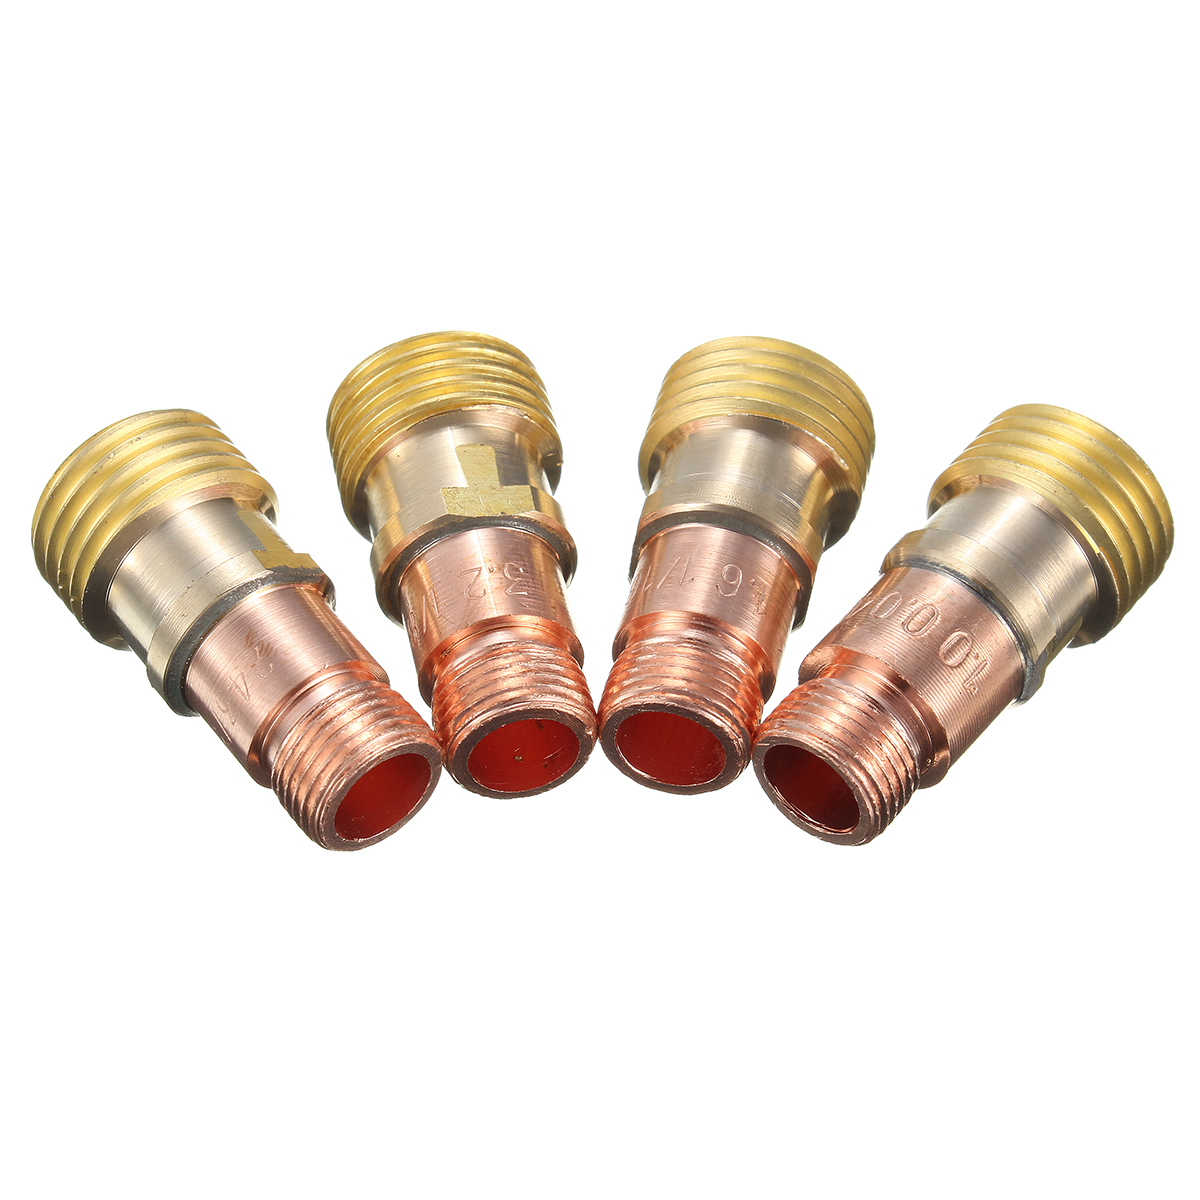 Brass-Collets-Stubby-Gas-Lens-Connector-With-Mesh-For-Tig-WP-171826-Torch-1138923-1